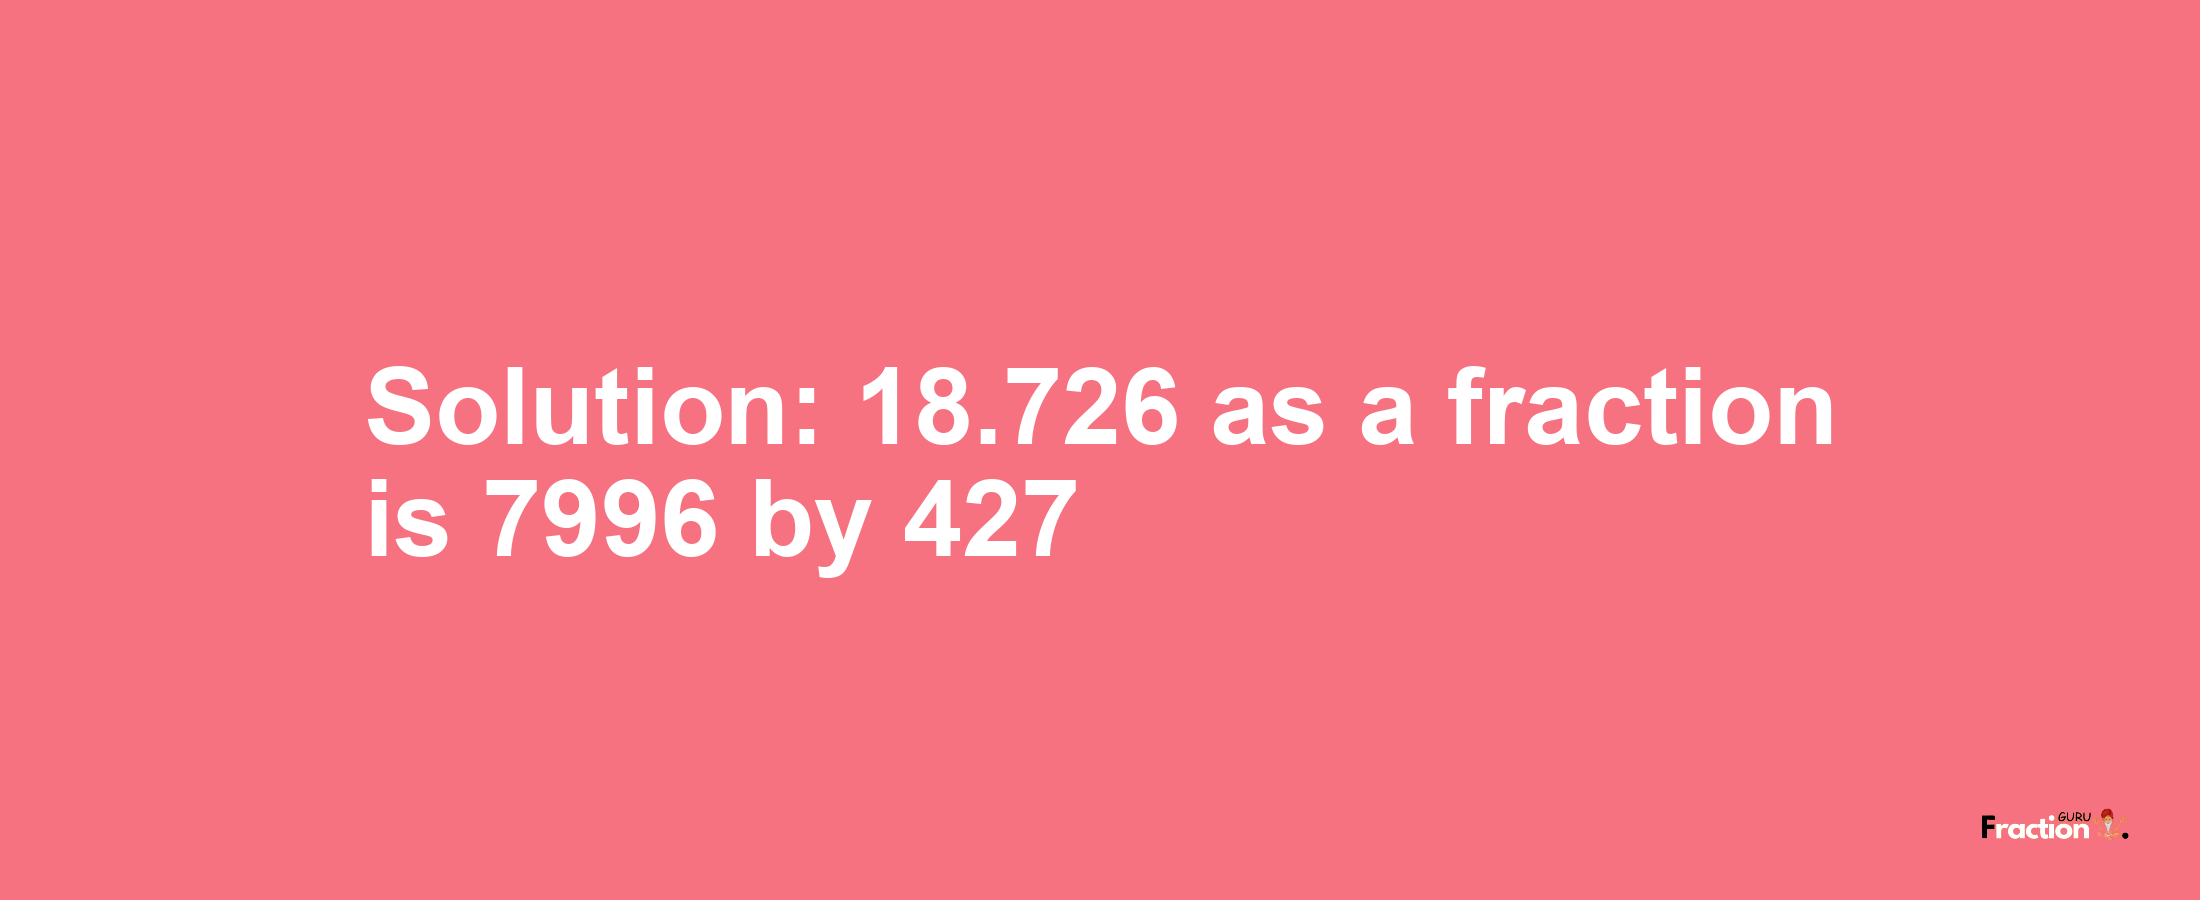 Solution:18.726 as a fraction is 7996/427